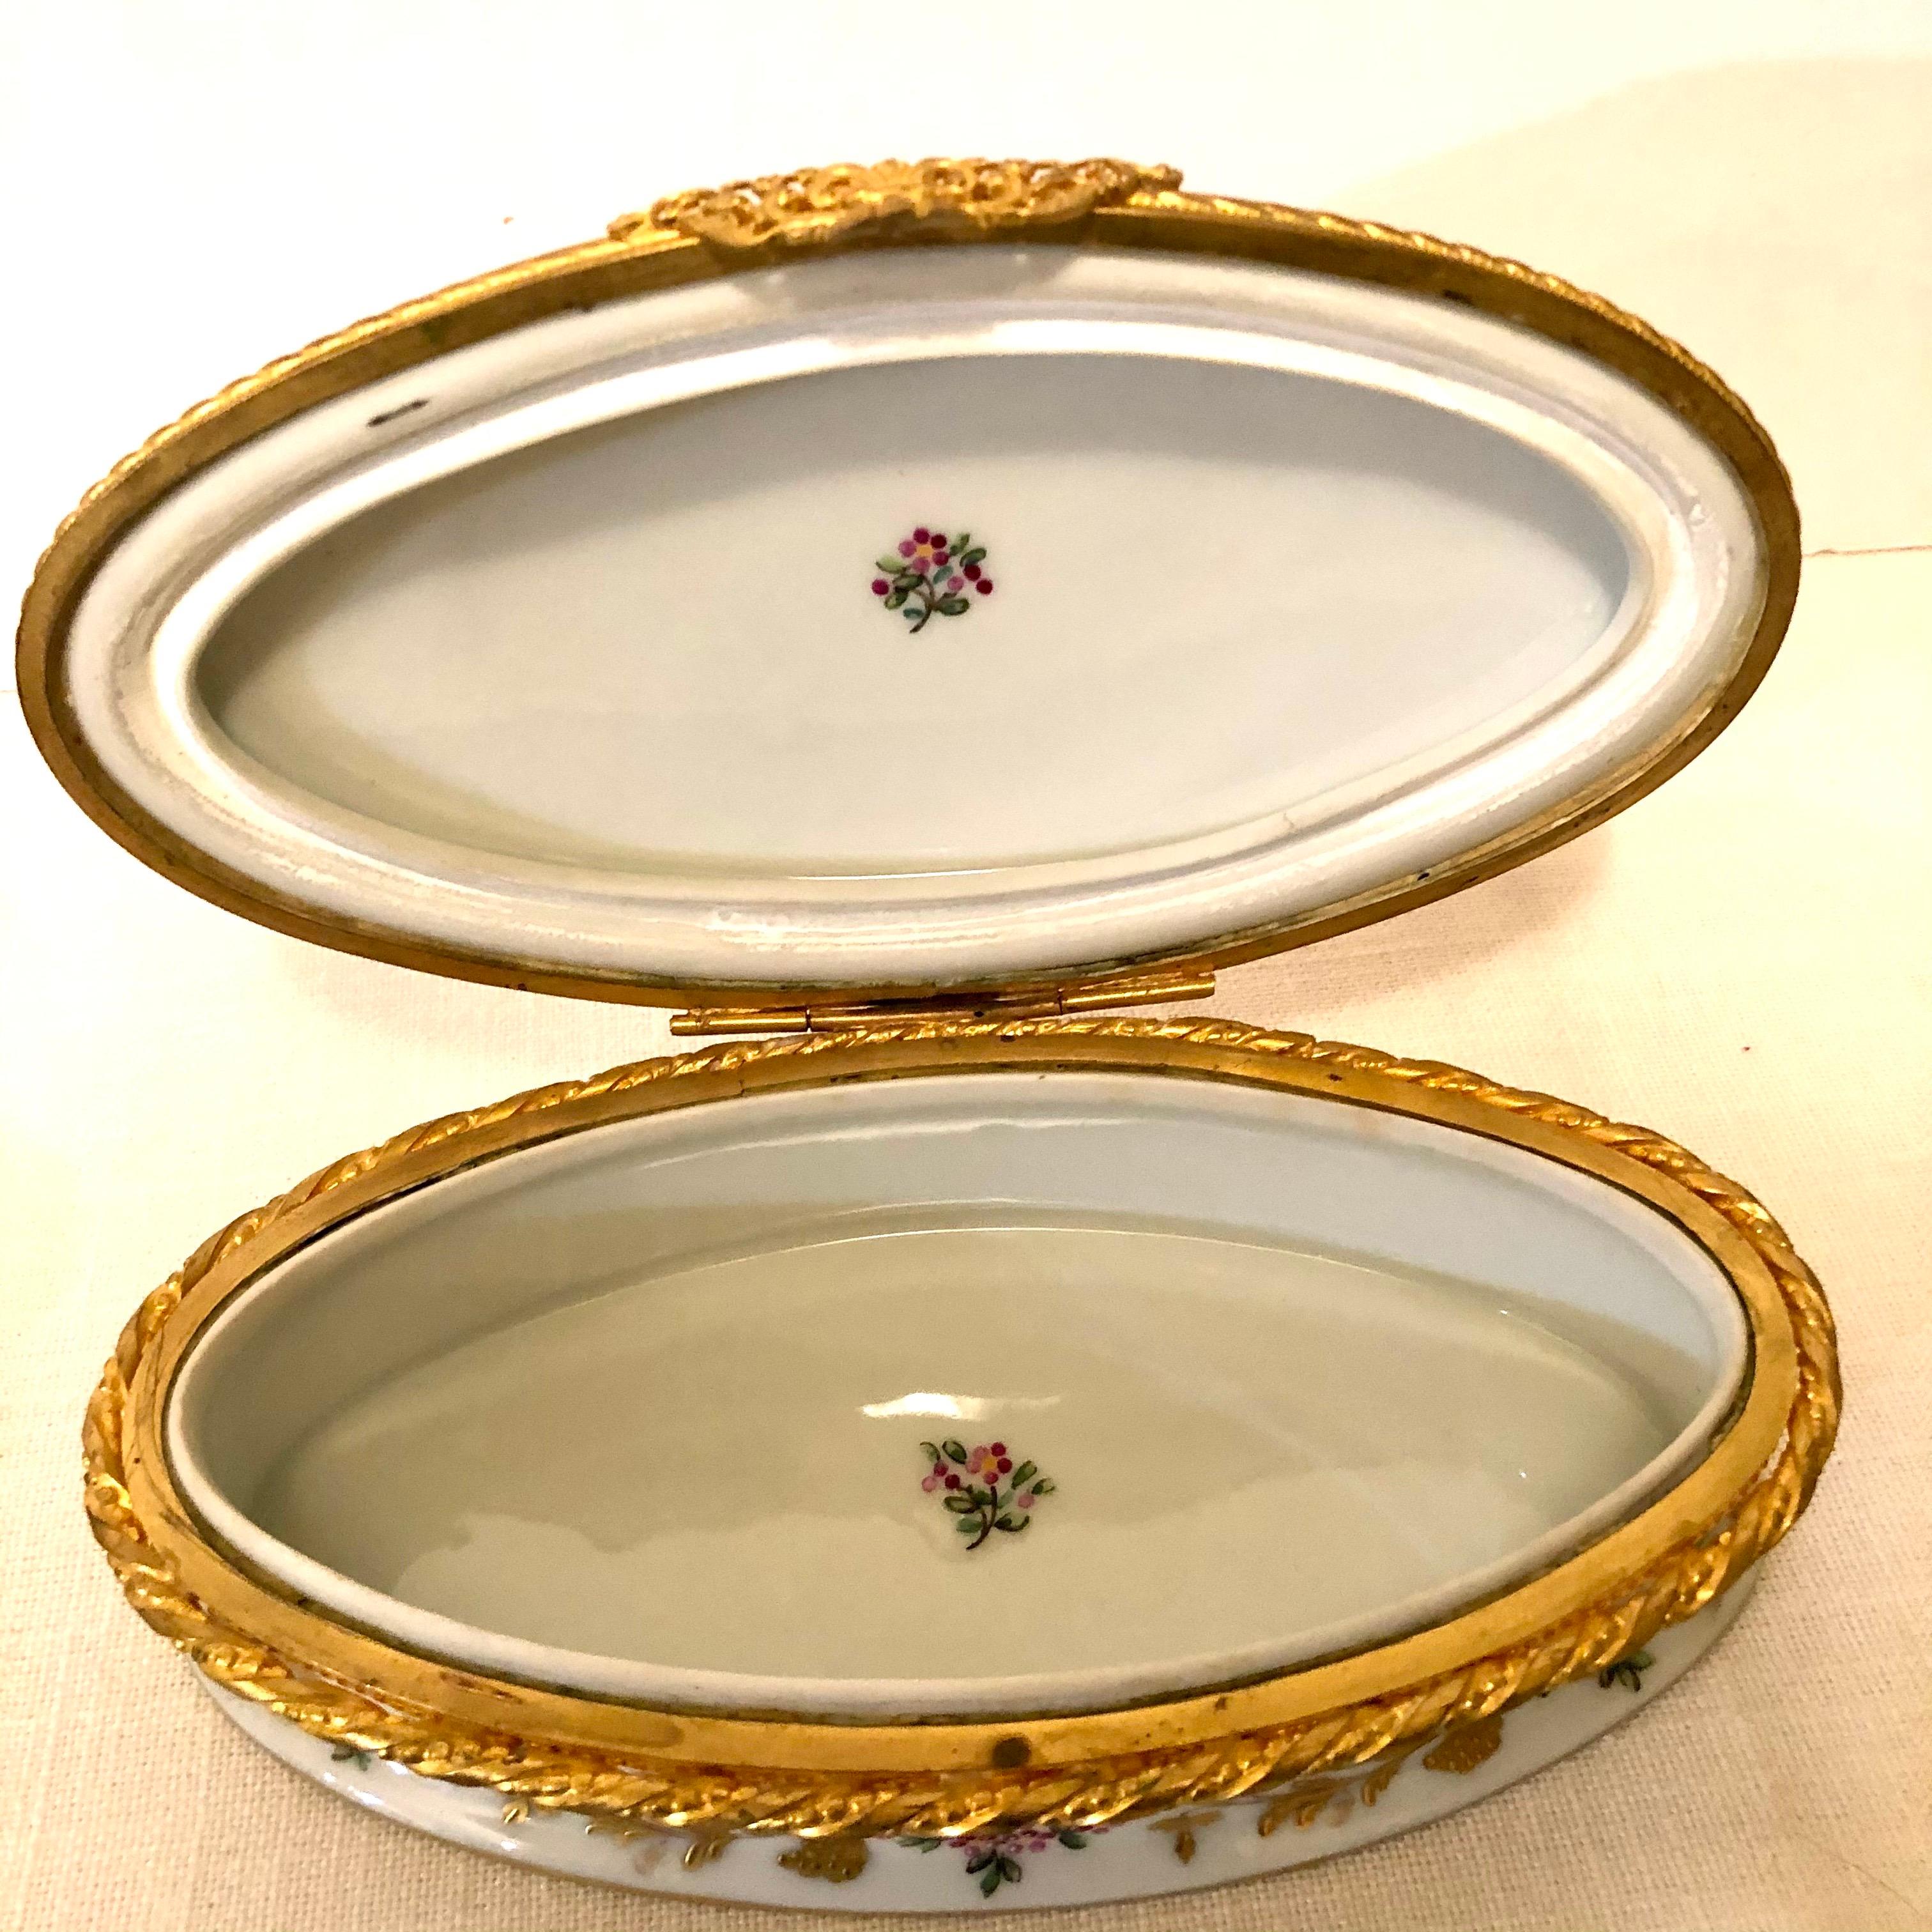 Le Tallec Oval Box with Raised Gilded Leaves & Raspberries and Ribbon of Flowers 1